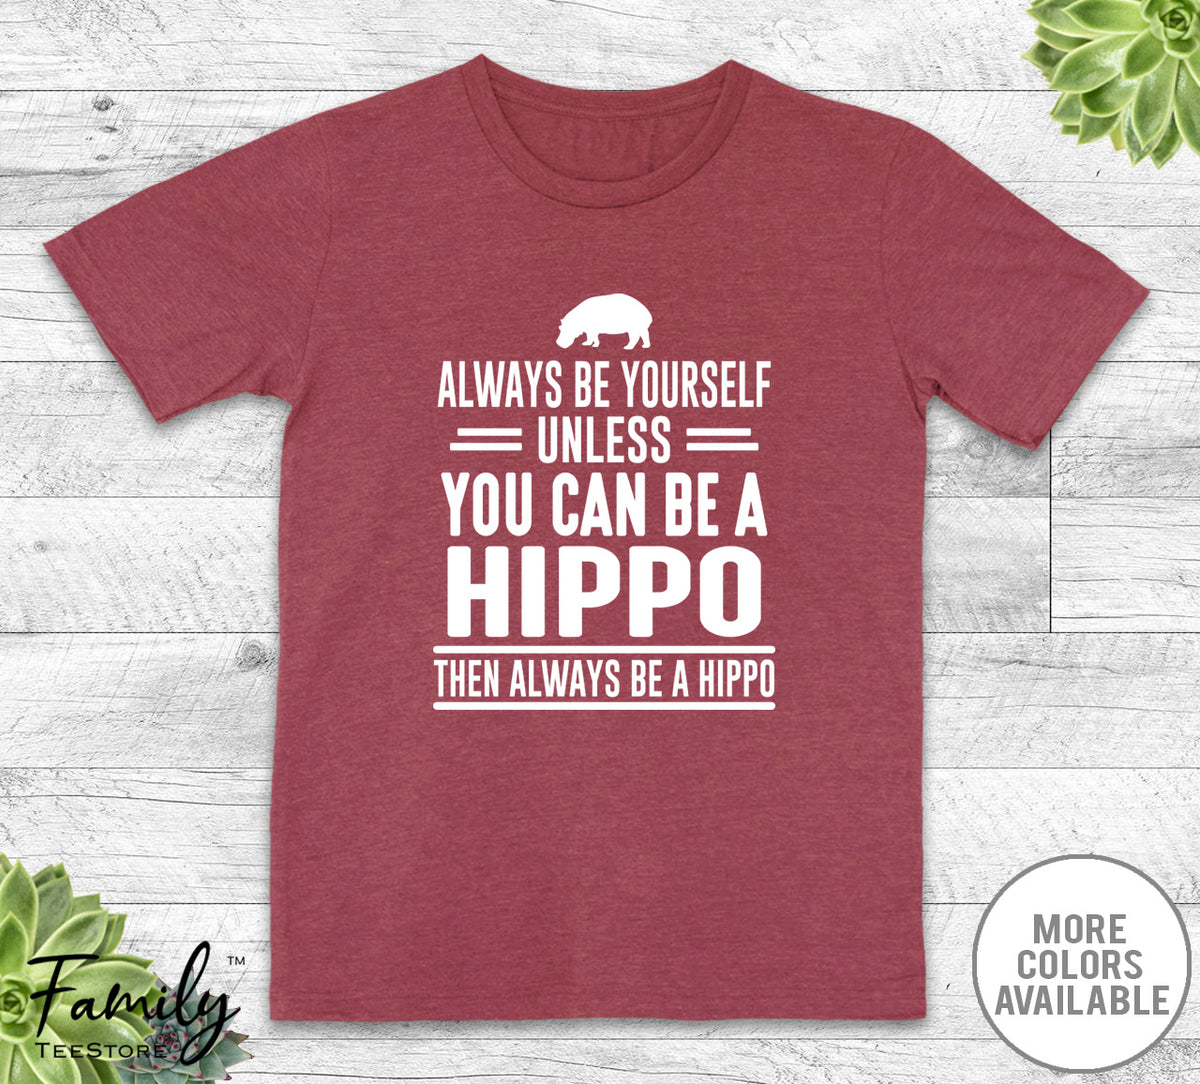 Always Be Yourself Unless You Can Be A Hippo - Unisex T-shirt - Hippo Shirt - Hippo Gift